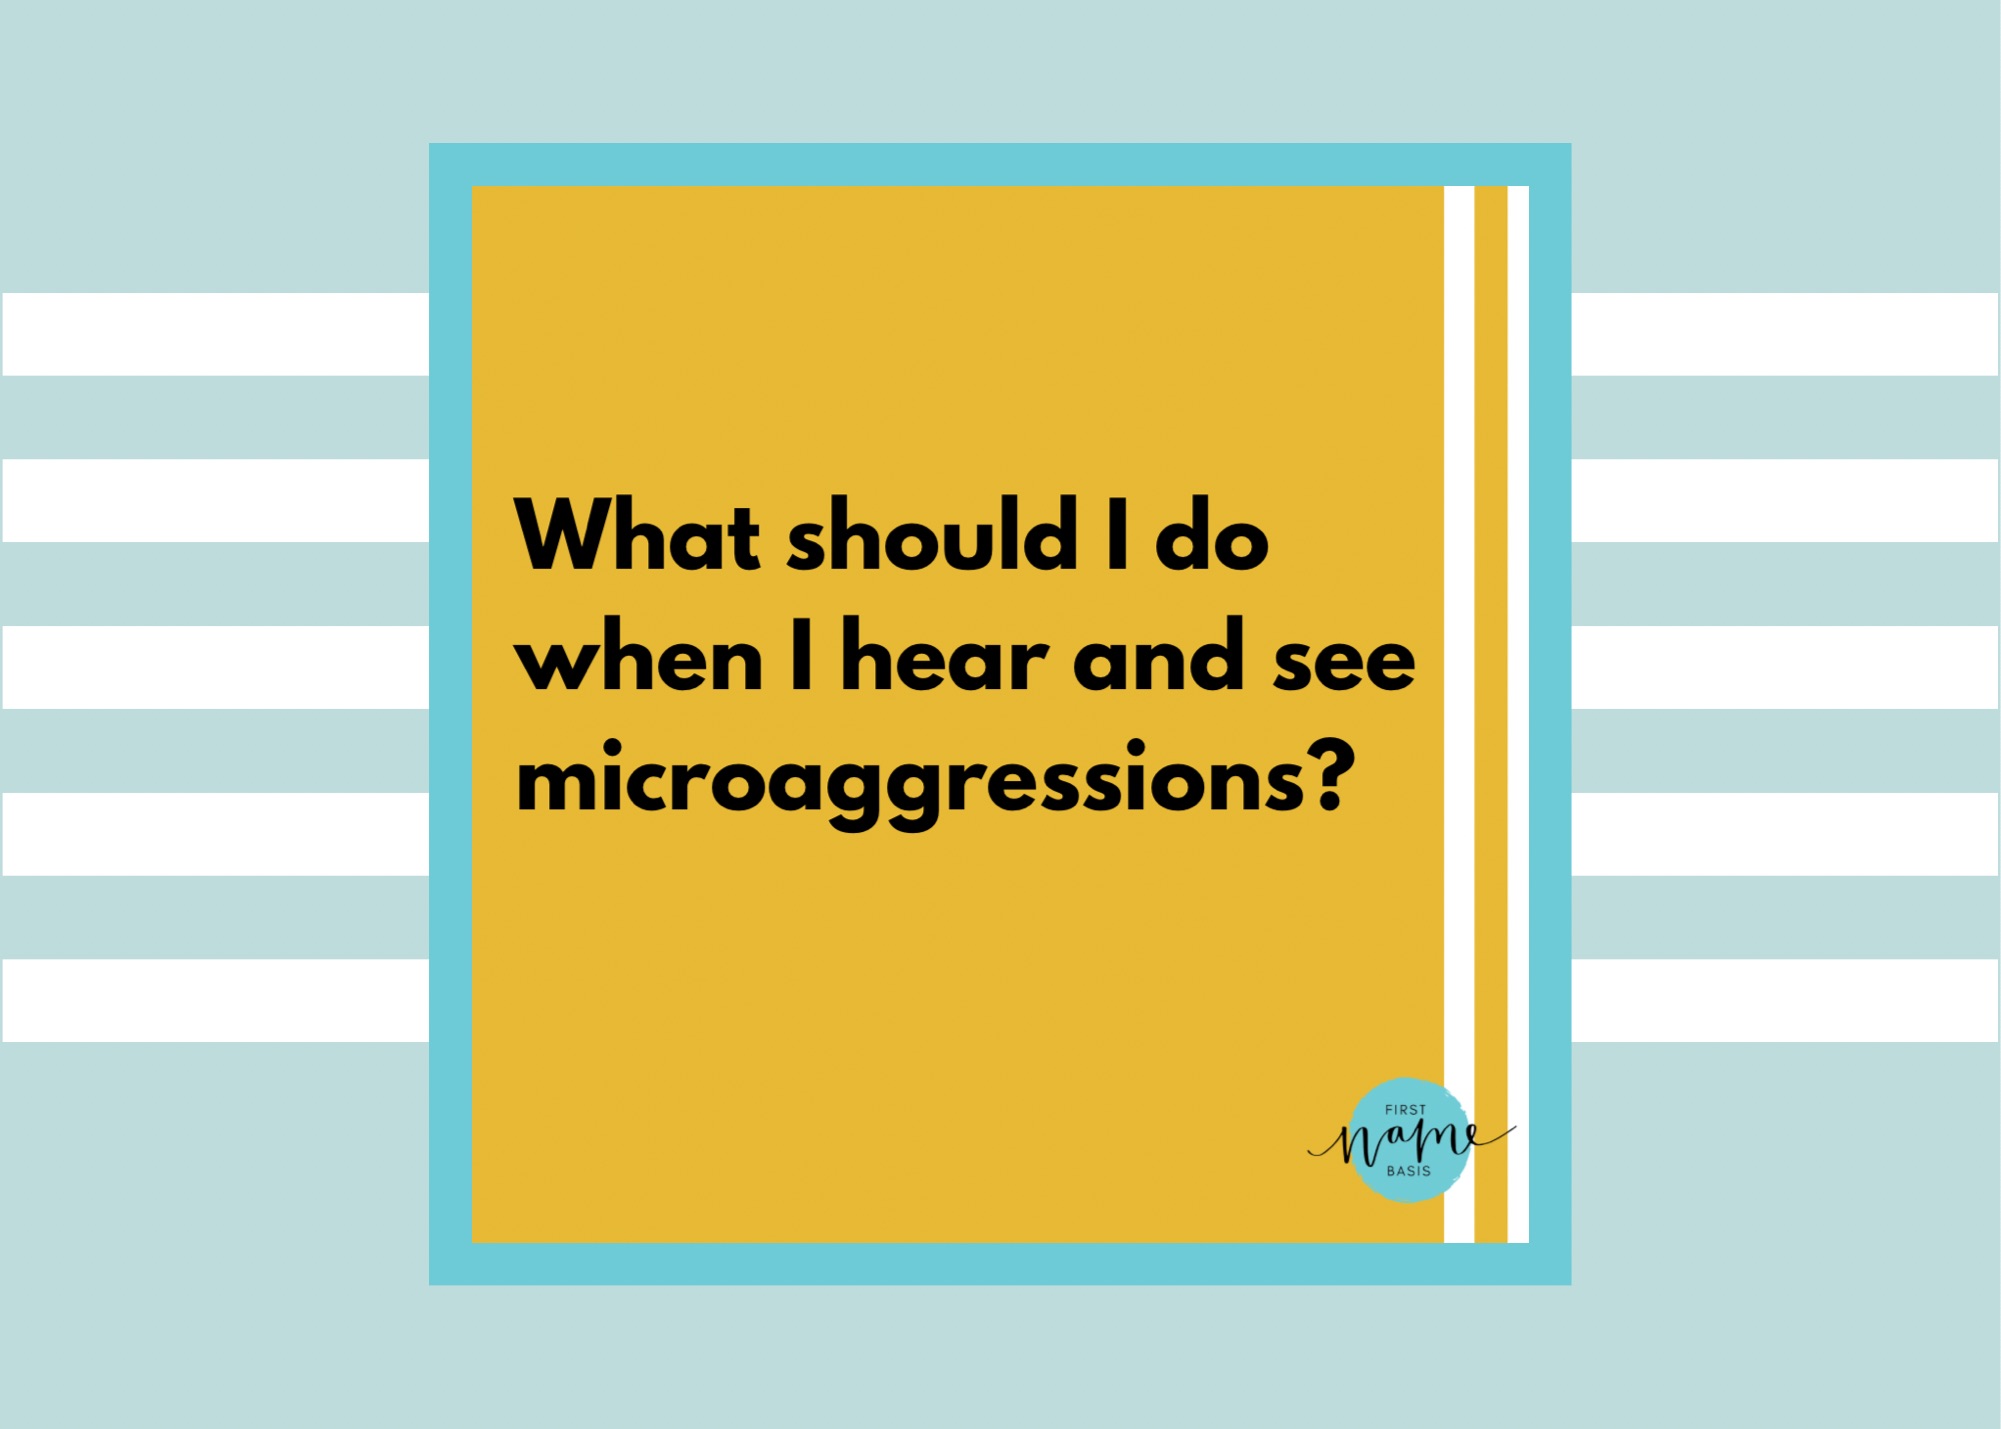 What Should I Do When I Hear and See Microaggressions?